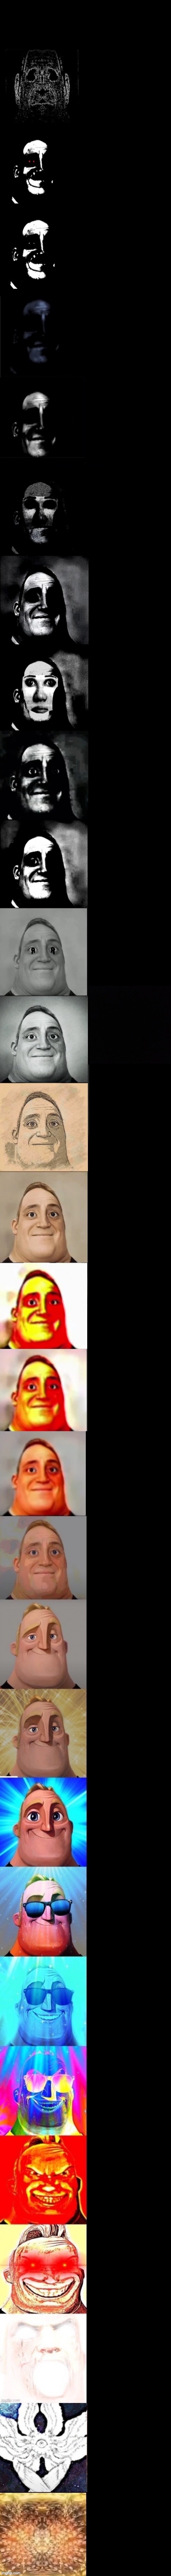 Mr Incredible Becoming Uncanny To Canny But It's Decent Blank Meme Template